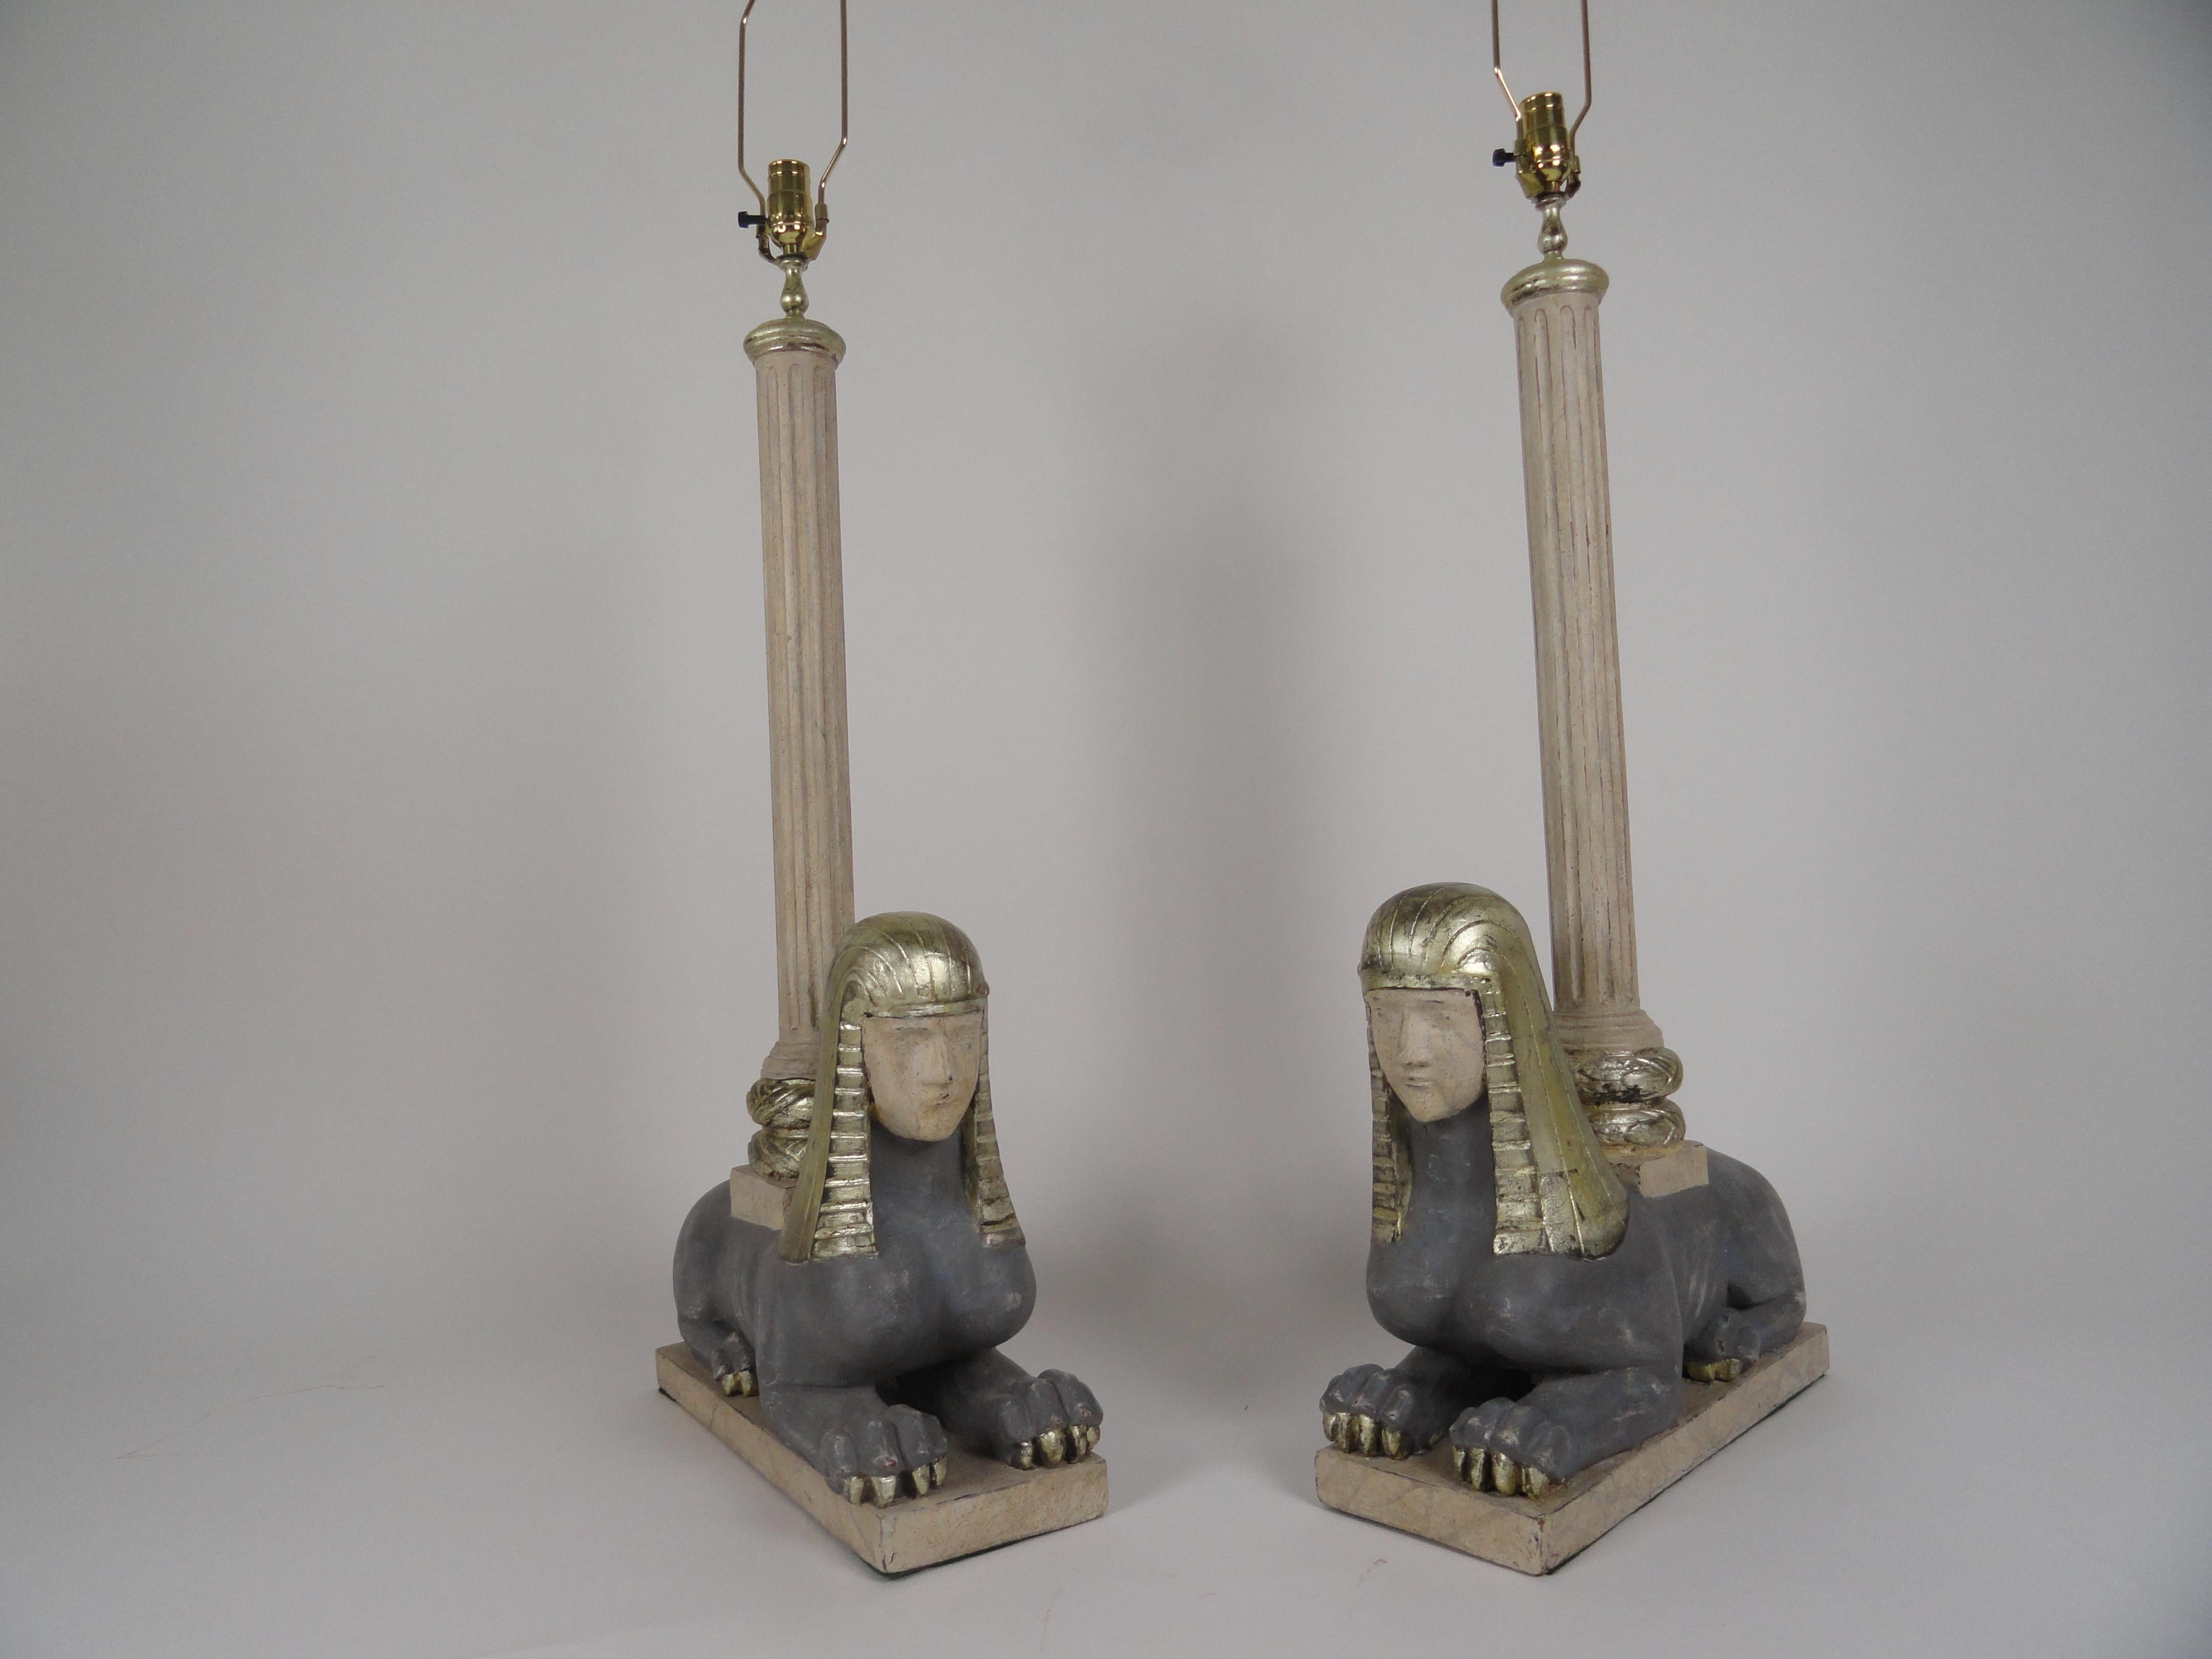 This amazing pair of Bugatti-style Egyptian revival fluted column lamps has kneeling Sphinx bases. Pair of Italian lamps in the manner of Bugatti. Carved wood with fluted columns. Newer finish of grays and white gold leaf. Rewired with inline